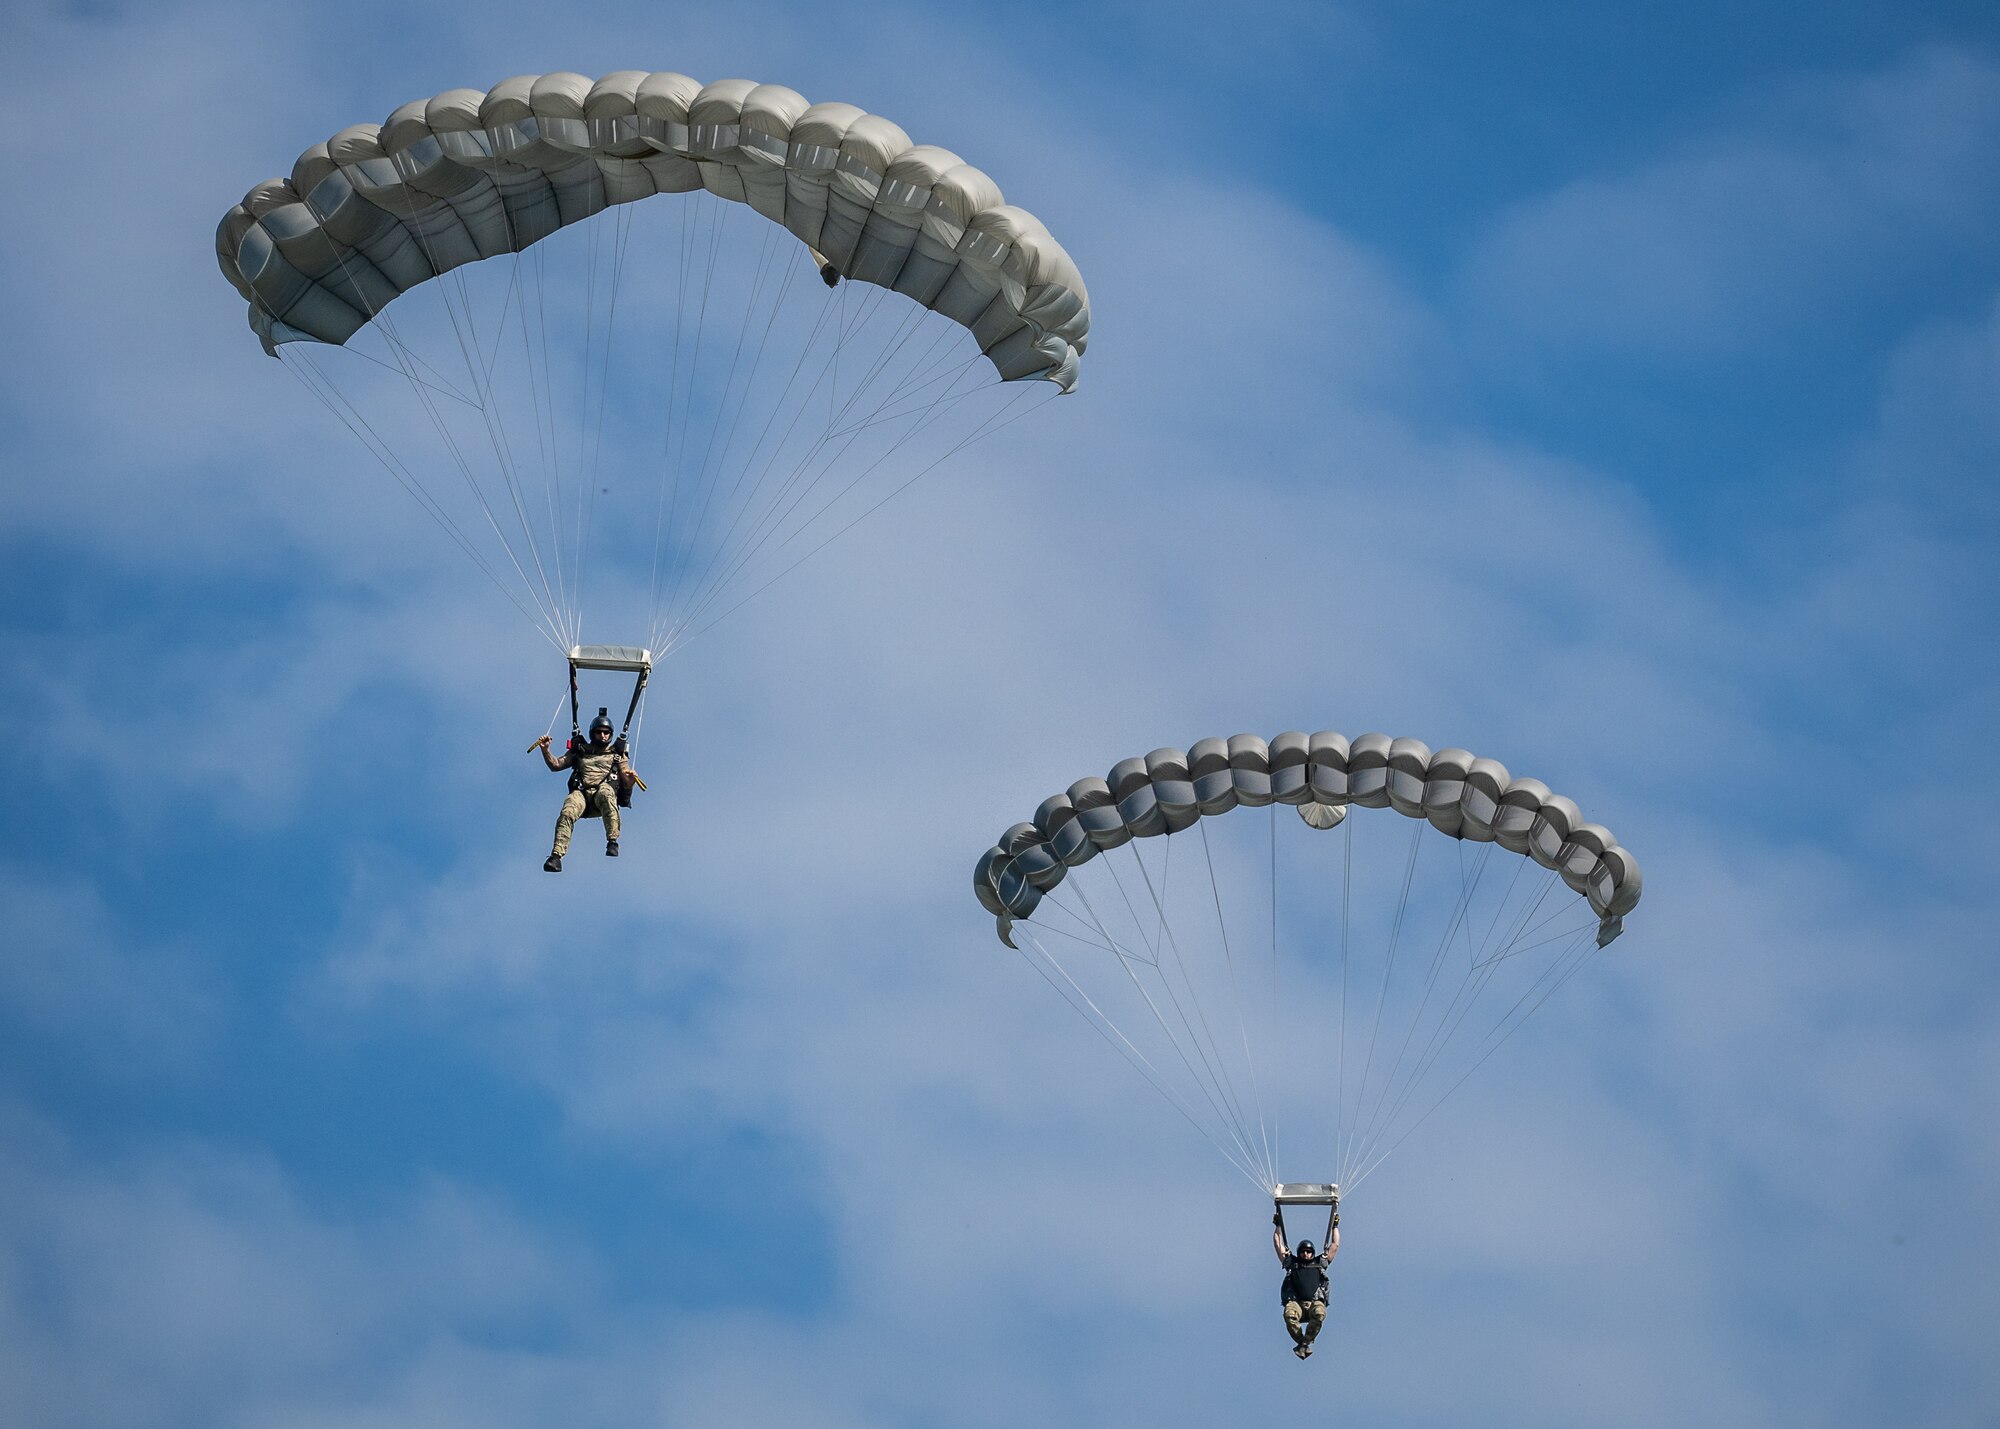 U.S. Air Force pararescuemen execute precision parachute landings at Freeman Municipal Airport in Seymour, Ind., Sept. 4, 2023, as part of the PJ Rodeo. The biennial event, which tests the capabilities of pararescue Airmen across the service, was hosted by the Kentucky Air National Guard’s 123rd Special Tactics Squadron. (U.S. Air National Guard photo by Dale Greer)